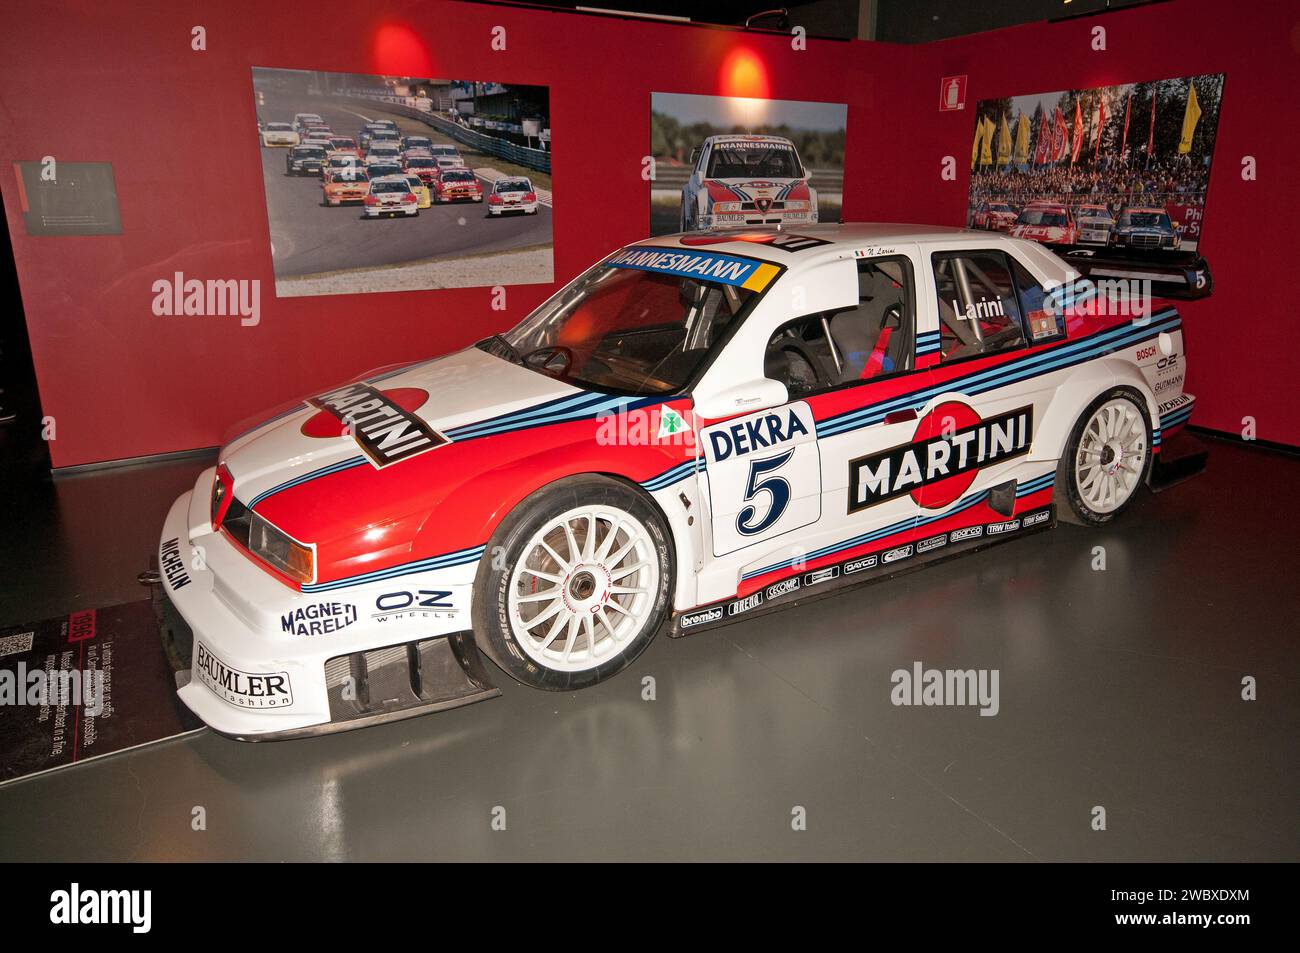 Racing car Alfa Romeo 155 V6 TI (Italy 1996), Museo Nazionale dell'Automobile (MAUTO), National Car Museum (since 1933), Turin, Piedmont, Italy Stock Photo